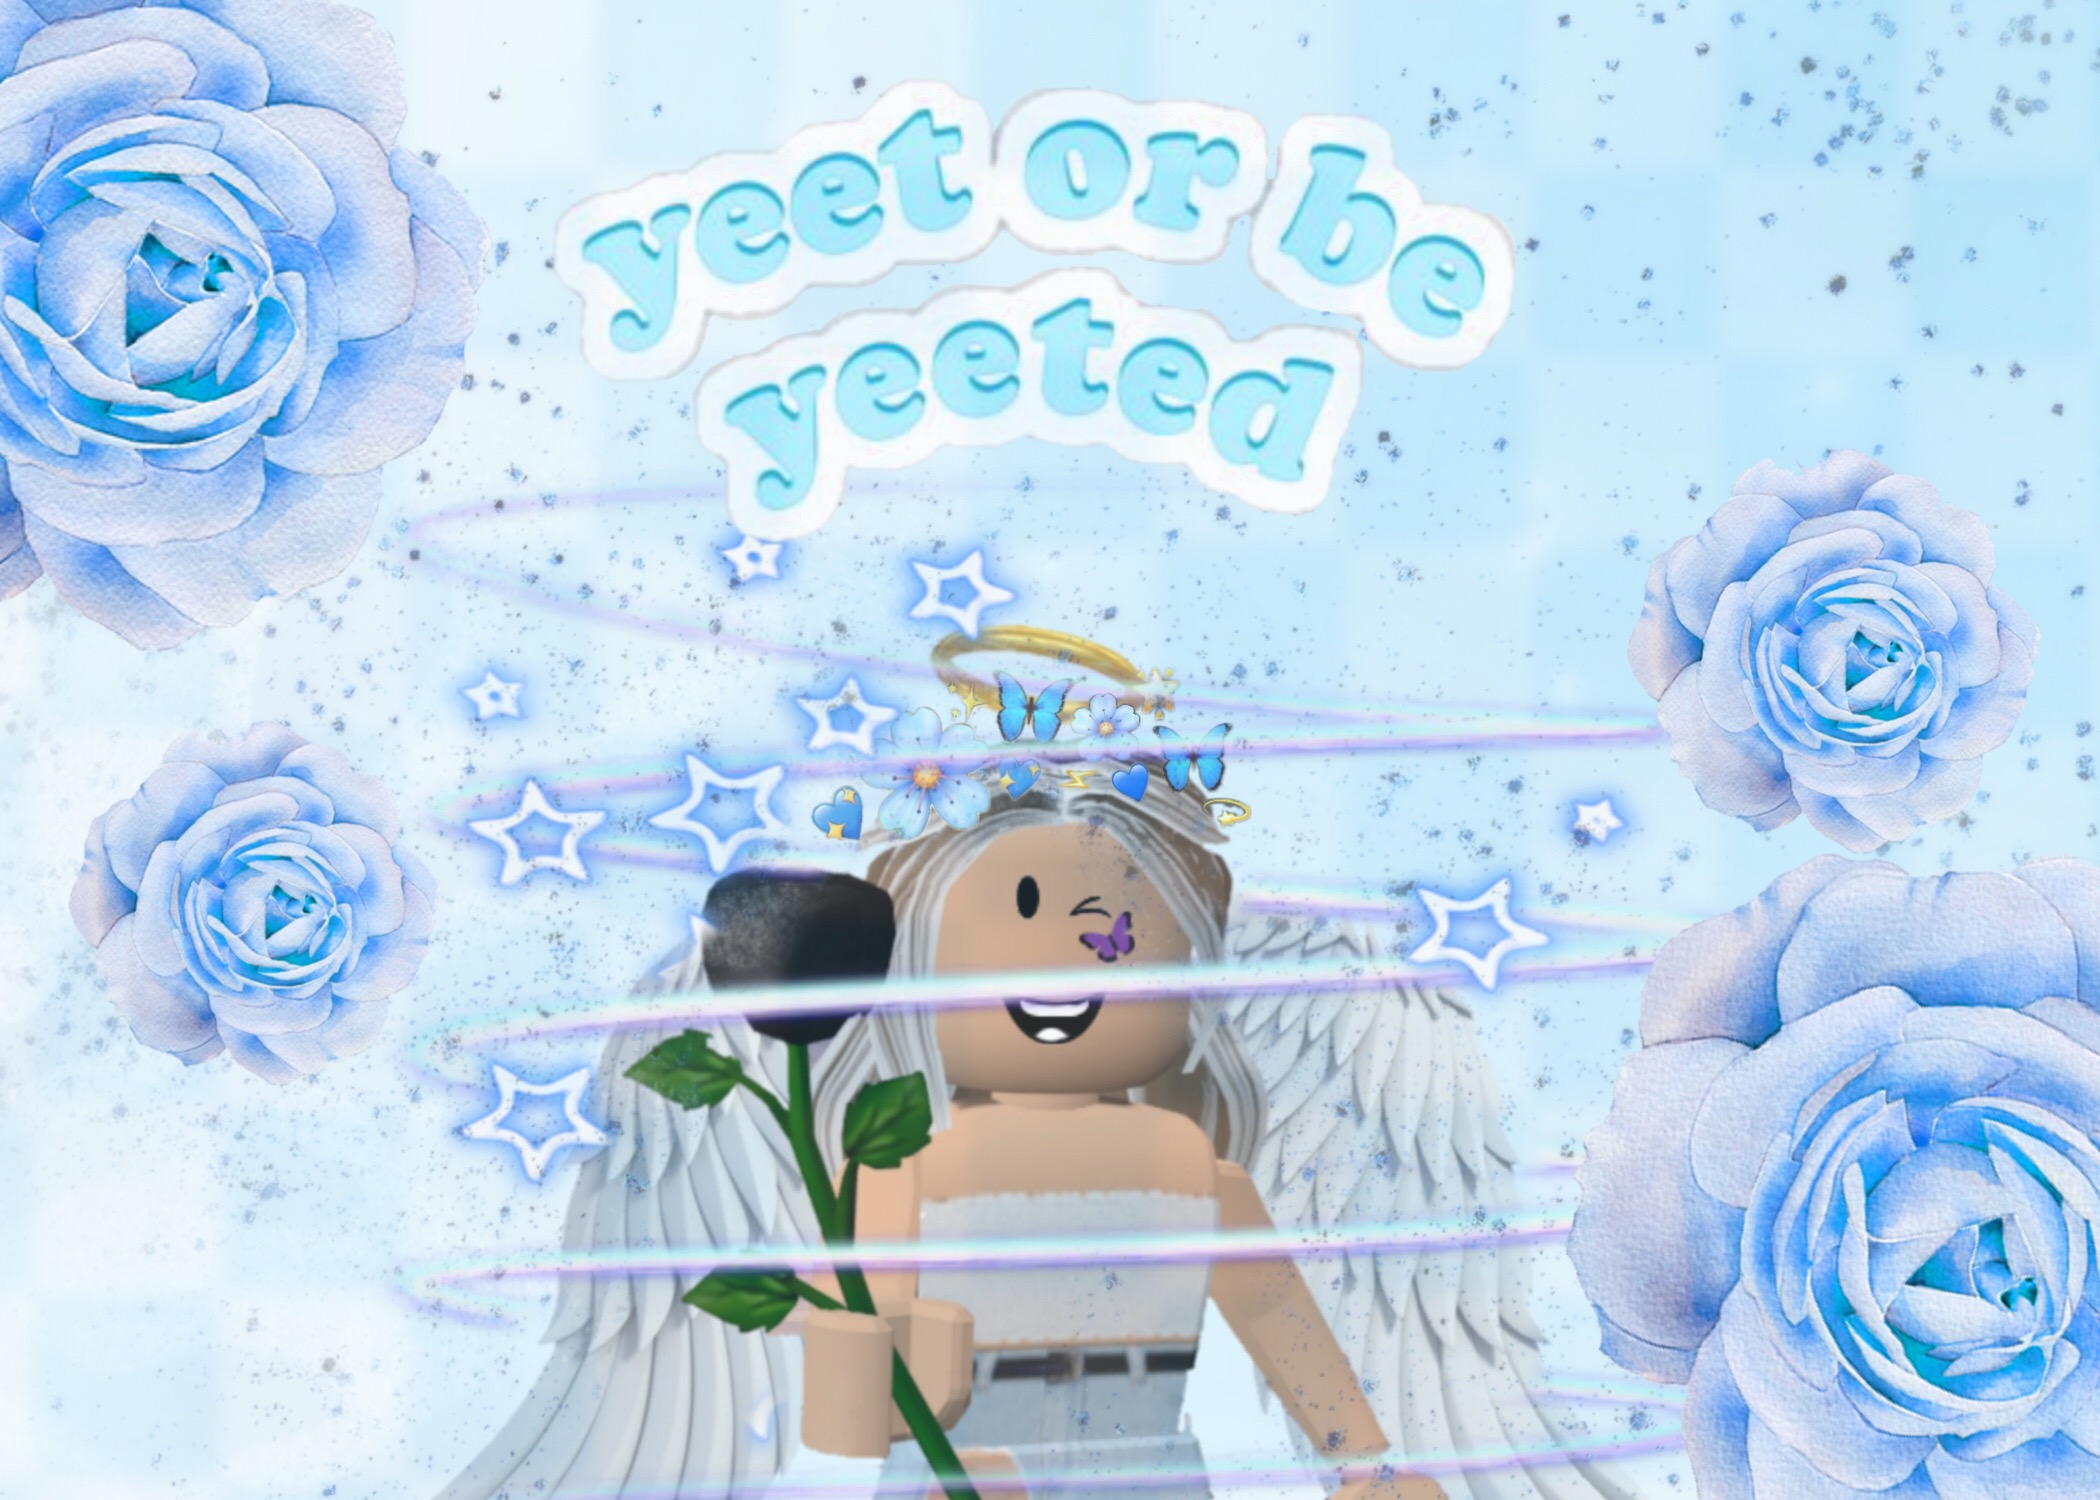 Interesting Aesthetic Image By Roblox